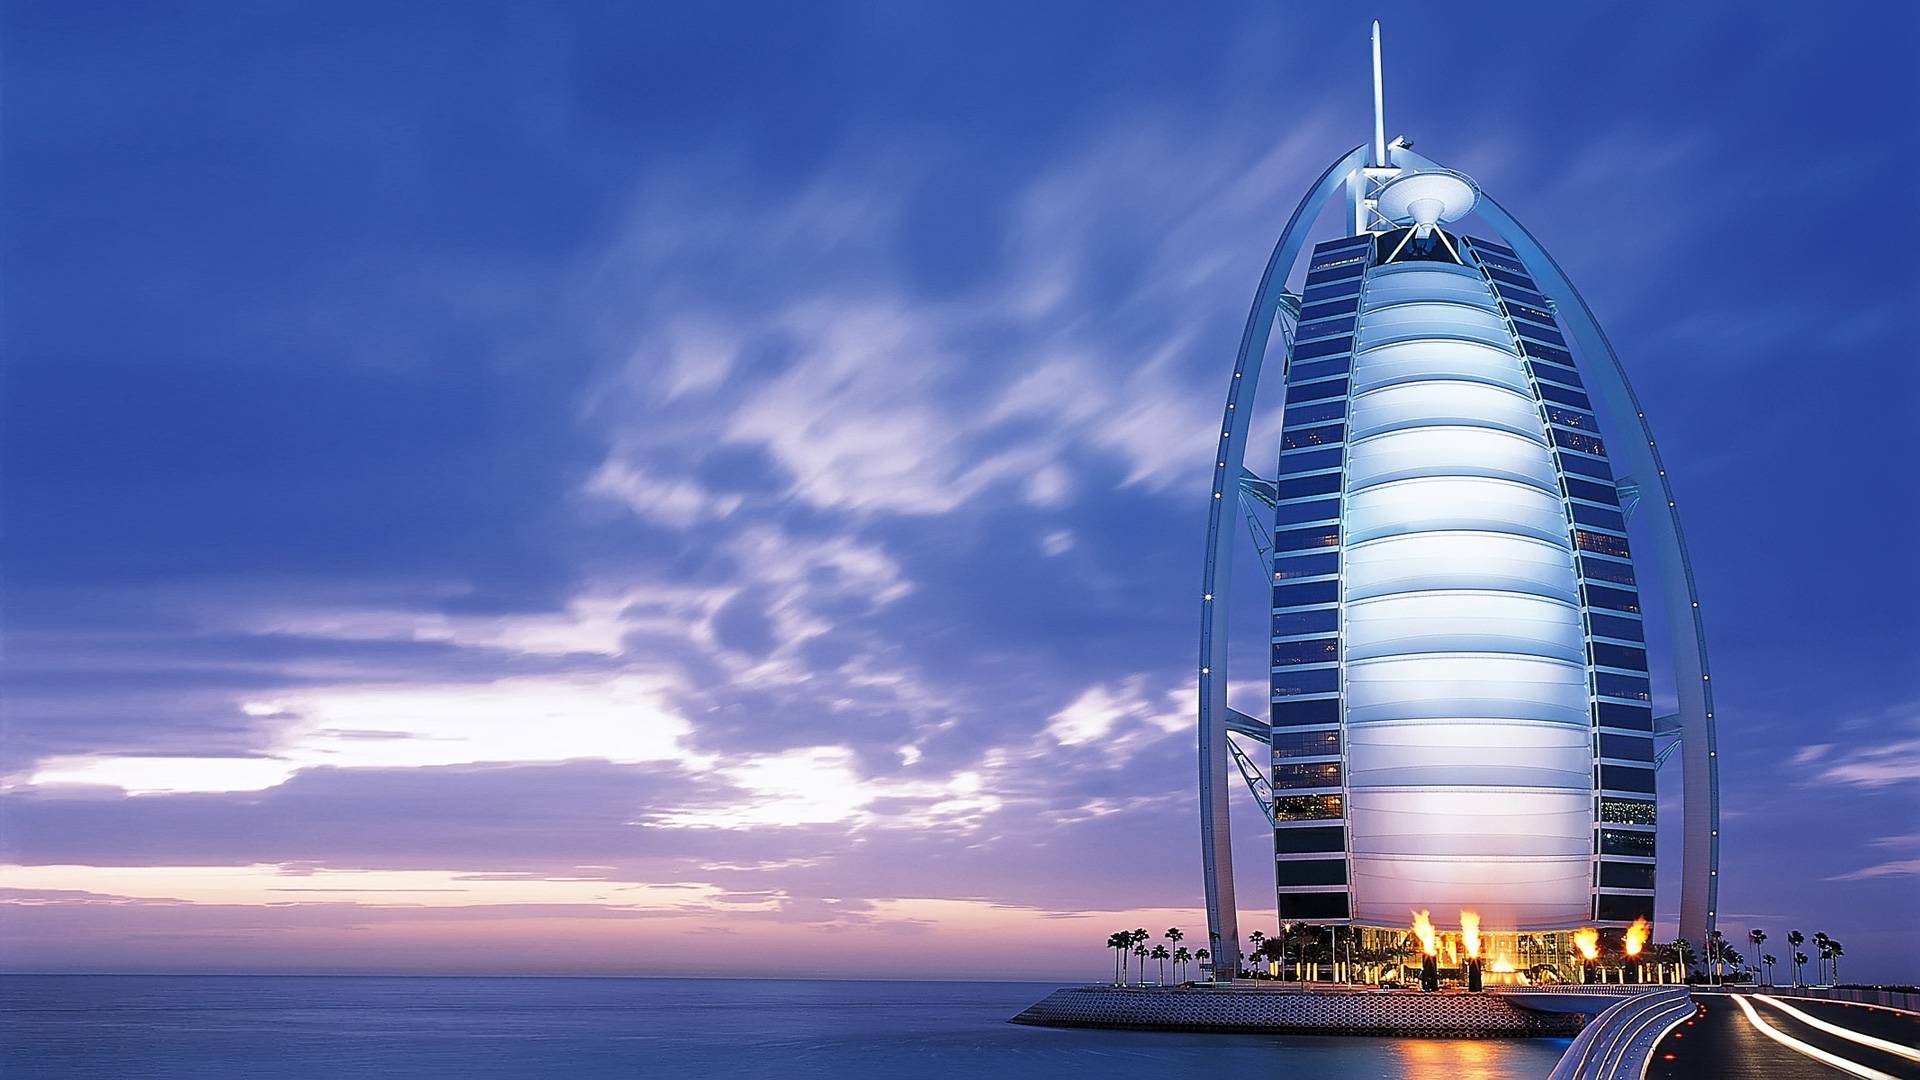 Jumeirah 4K wallpaper for your desktop or mobile screen free and easy to download